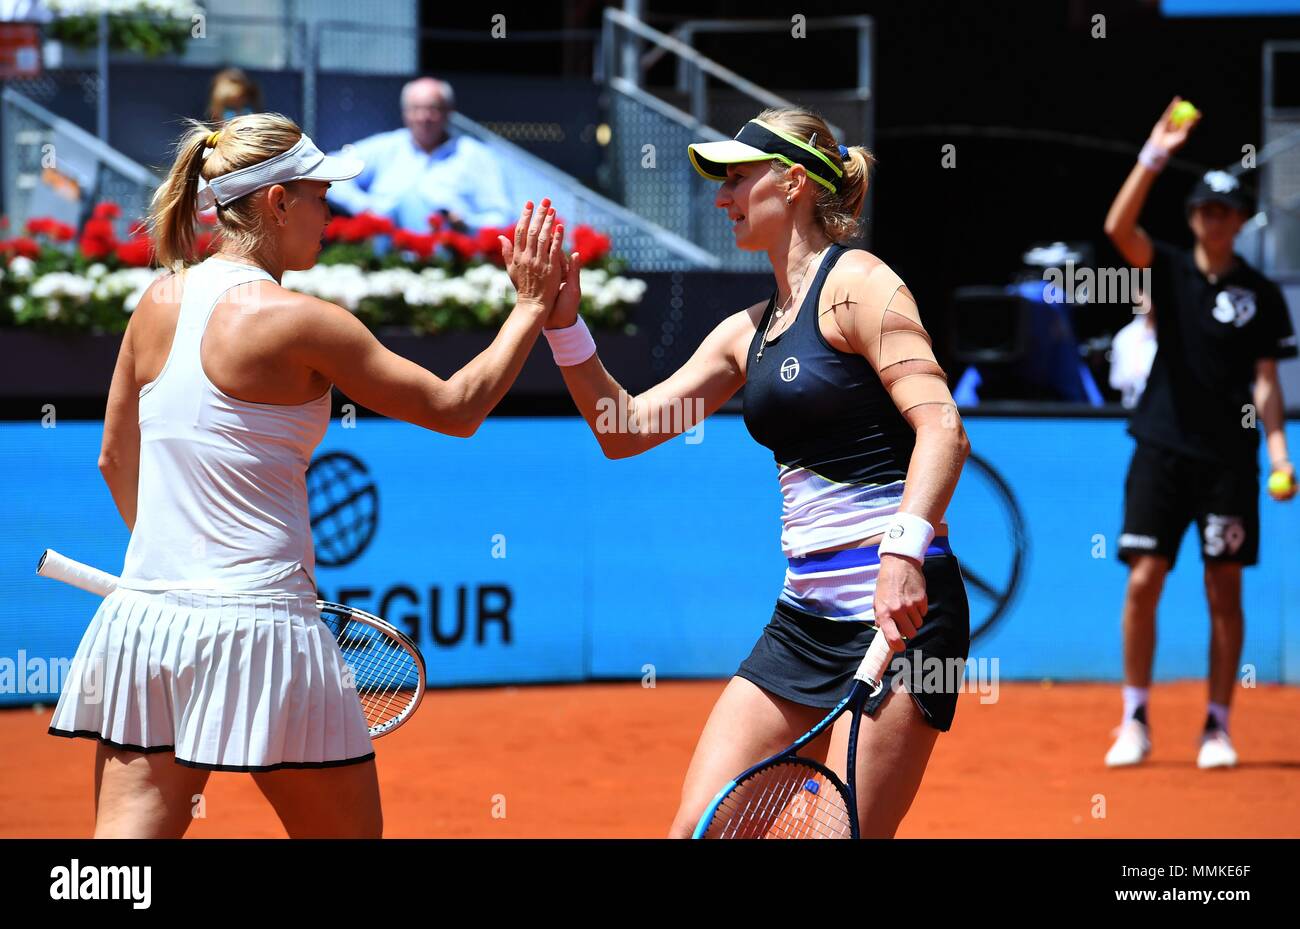 Madrid, Spain. 12th May 2018. Yekaterina Makarova (R) and Yelena Vesnina of  Russia celebrate during the women's doubles final against Kristina  Mladenovic of France and Timea Babos of Hungary at the Madrid